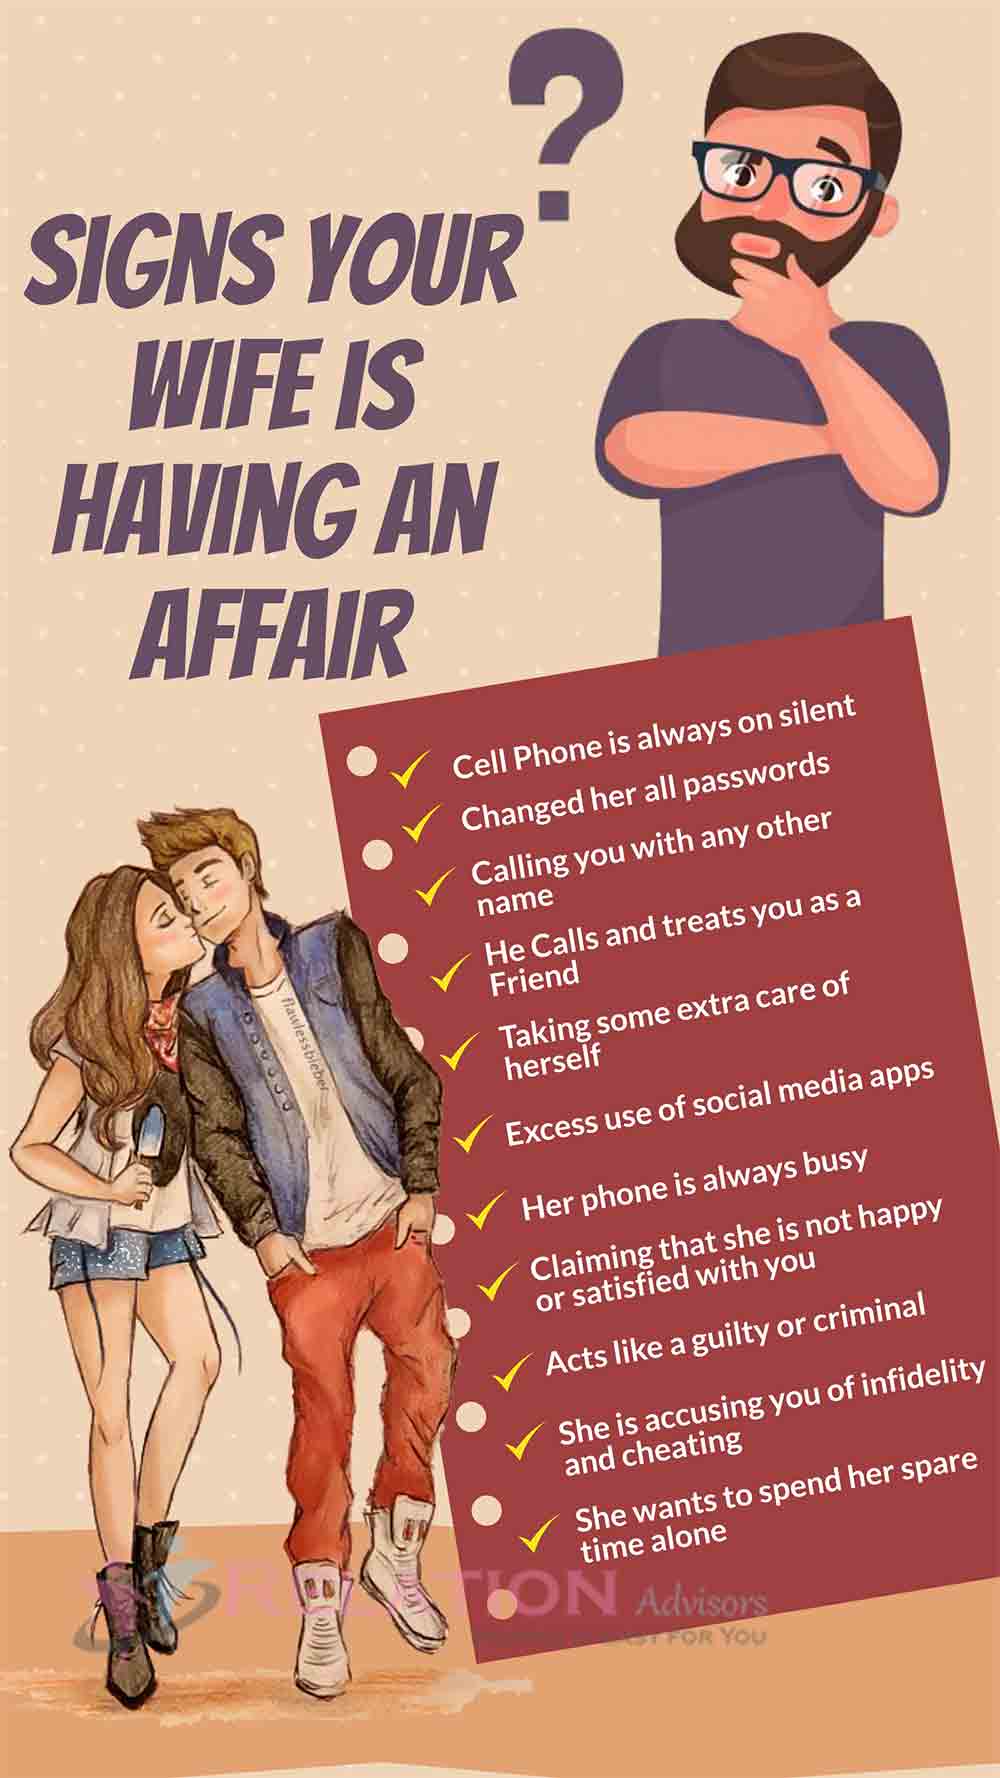 Signs your Wife is having an Affair